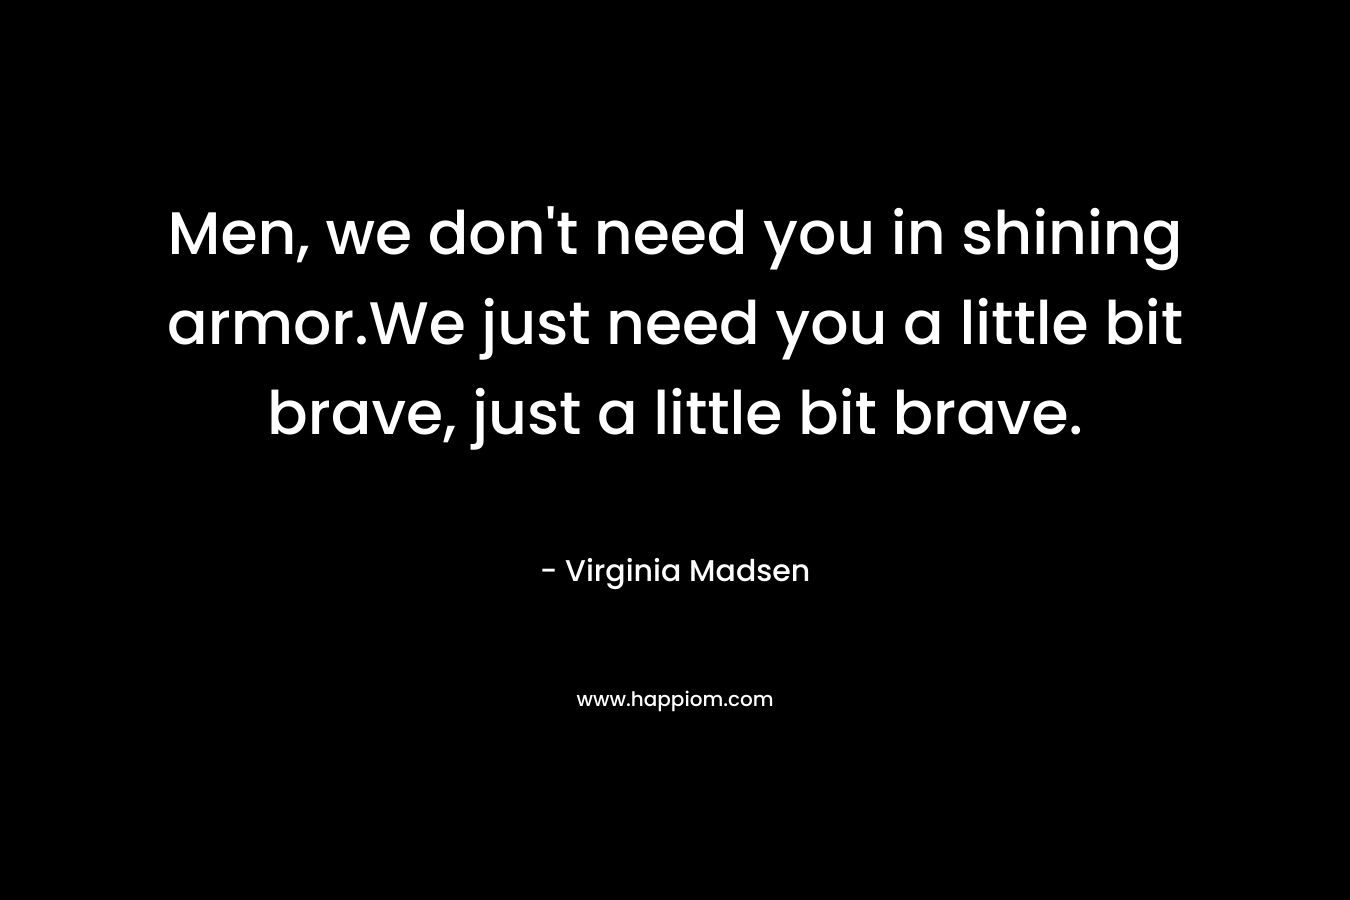 Men, we don't need you in shining armor.We just need you a little bit brave, just a little bit brave.